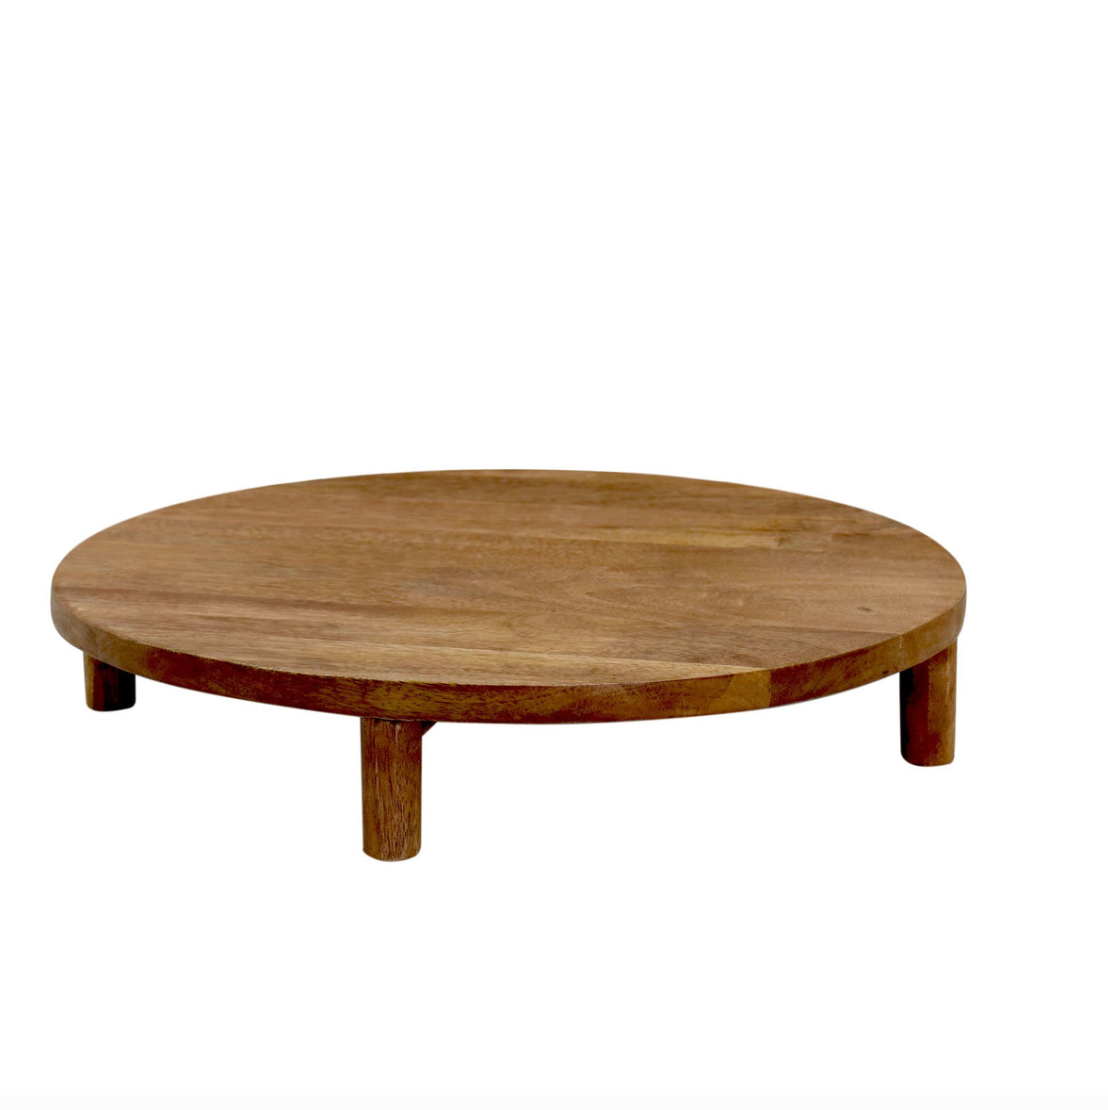 Hampstead Pedestal Board - Different Sizes - Daisy Grace Lifestyle